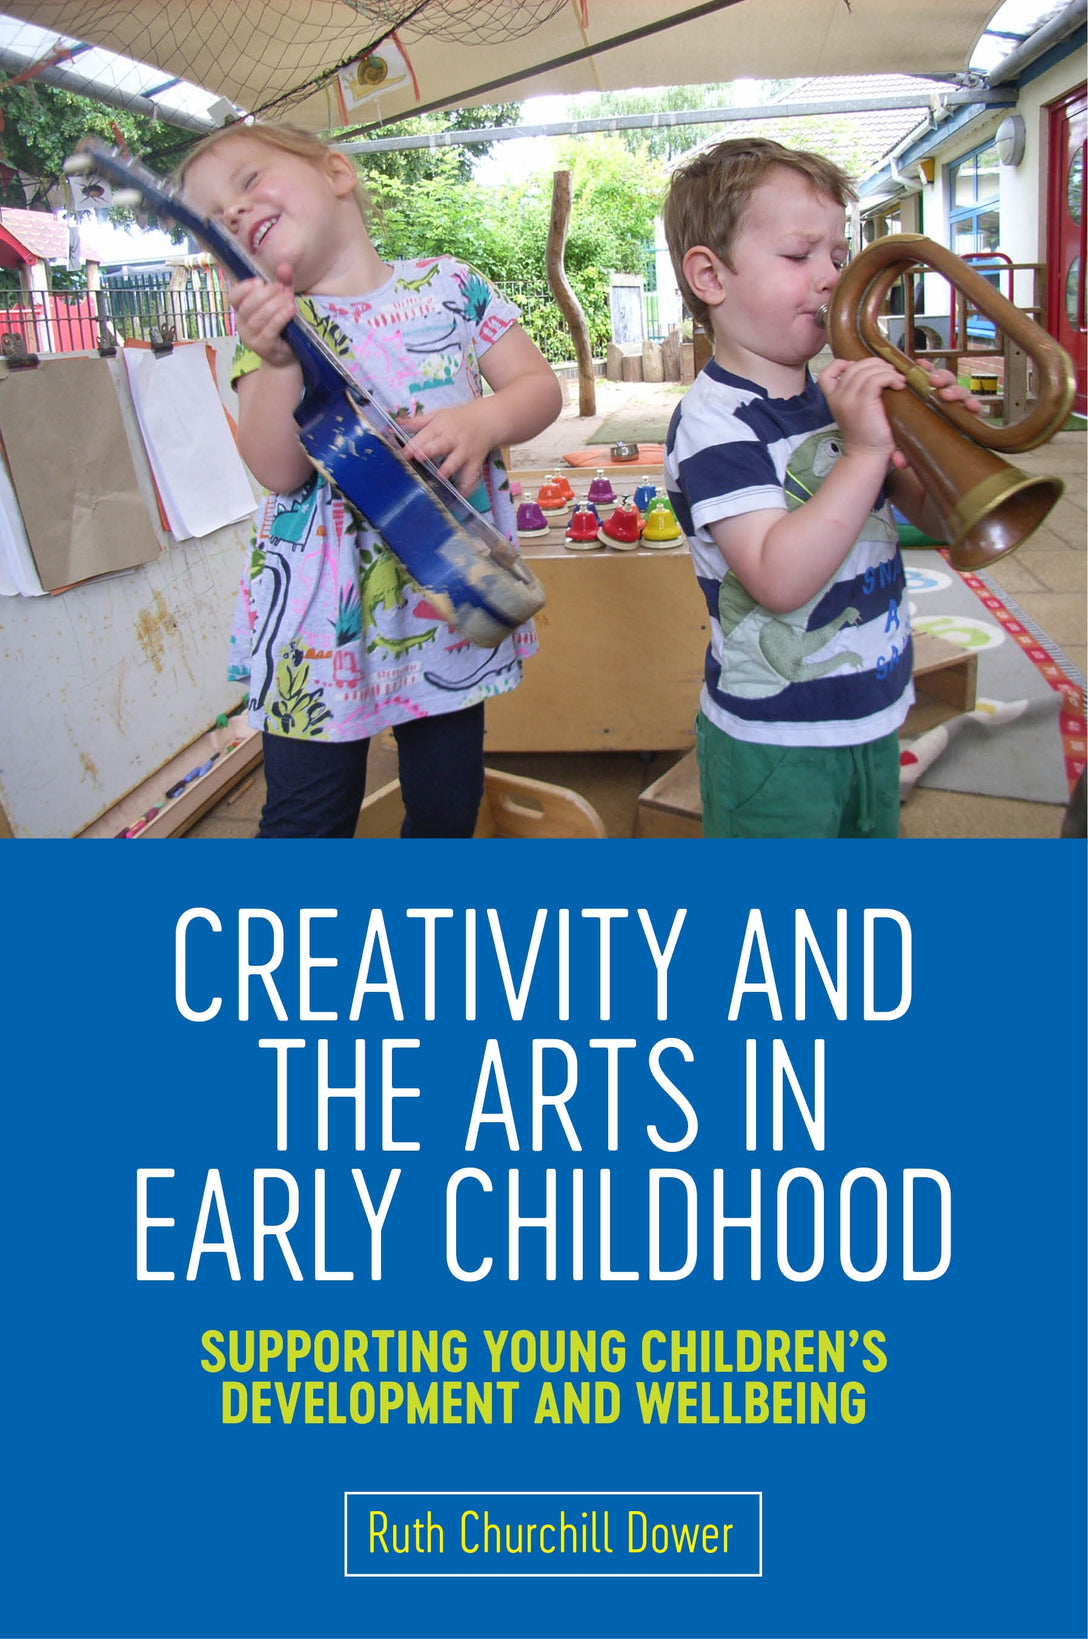 Creativity and the Arts in Early Childhood by Ruth Churchill Churchill Dower